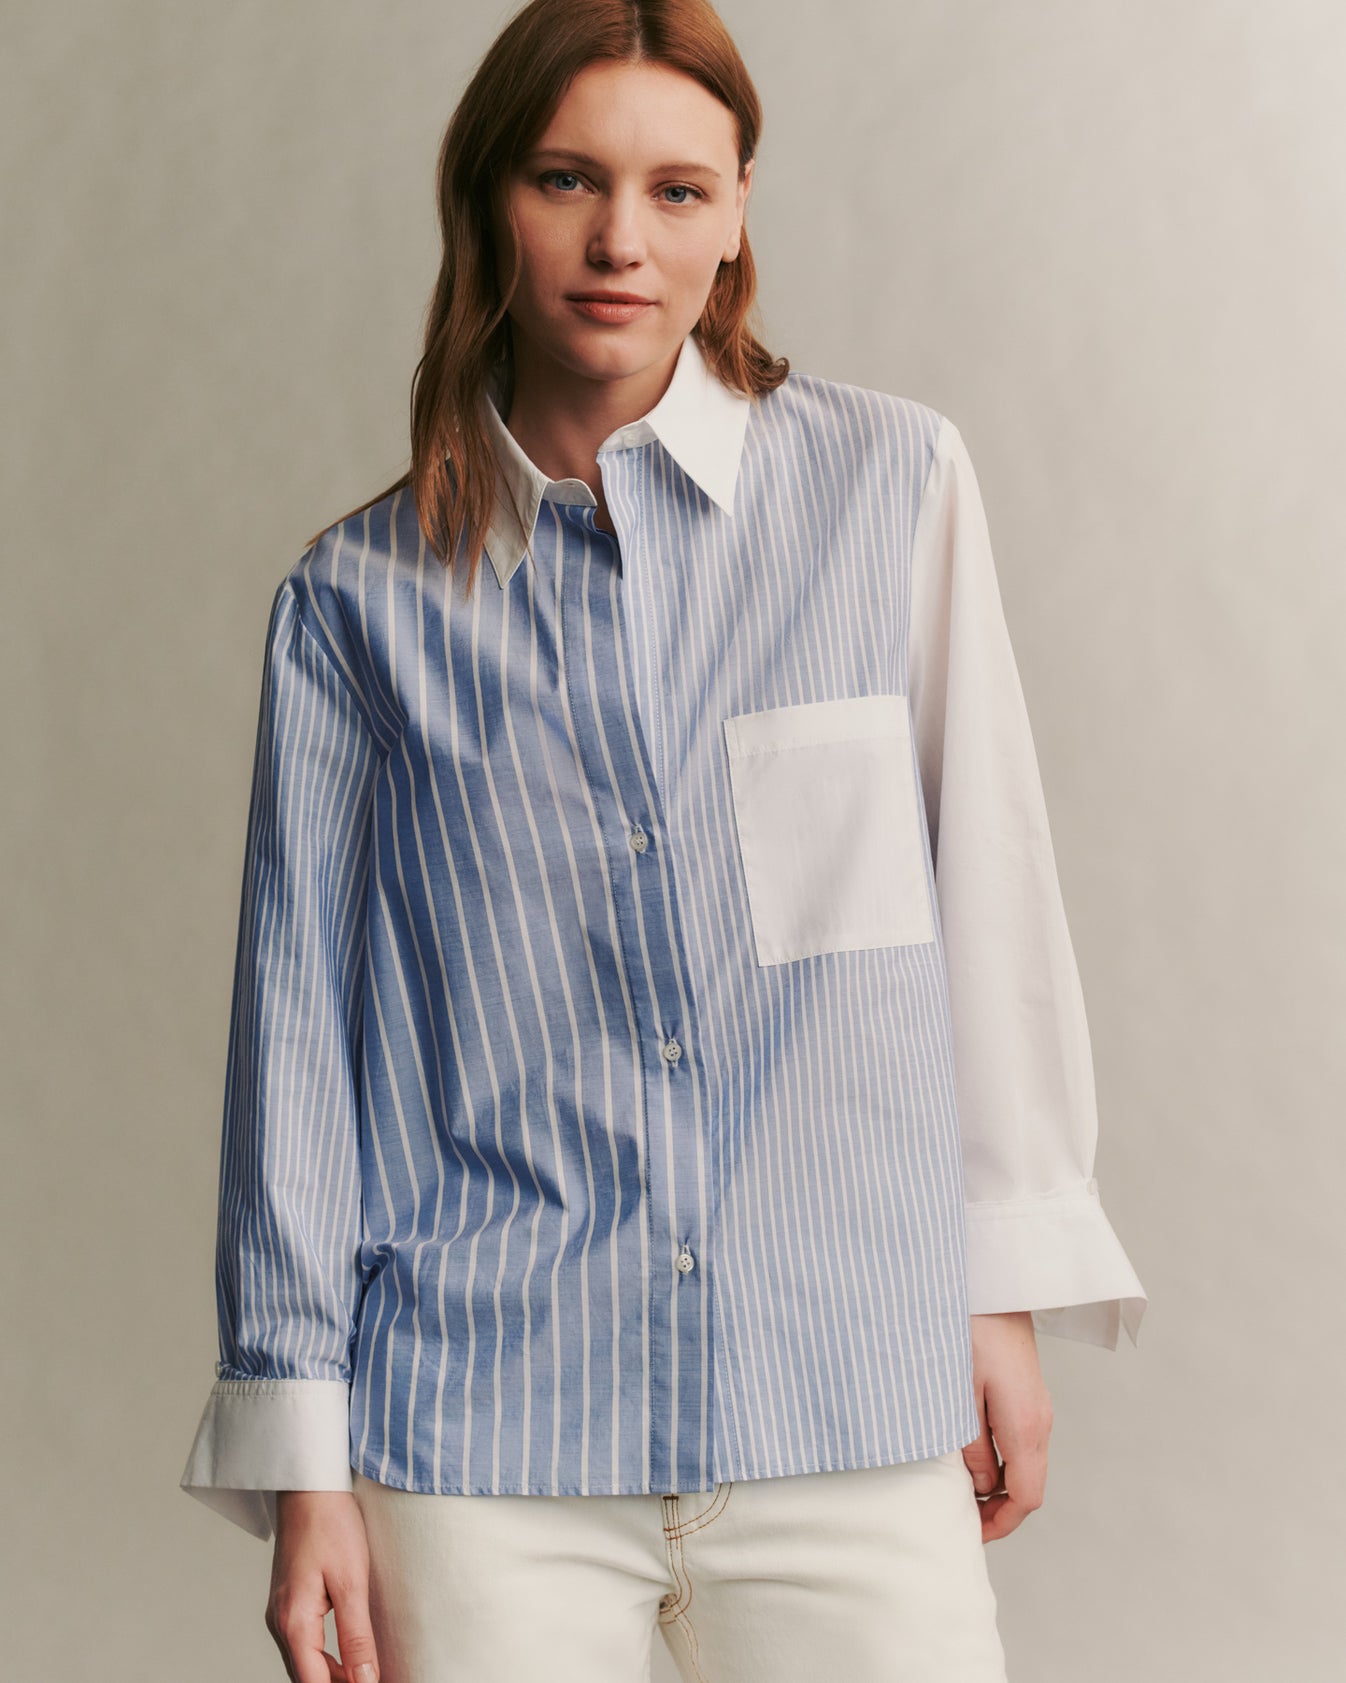 TWP Indigo/white New Morning After shirt in combo stripe view 2